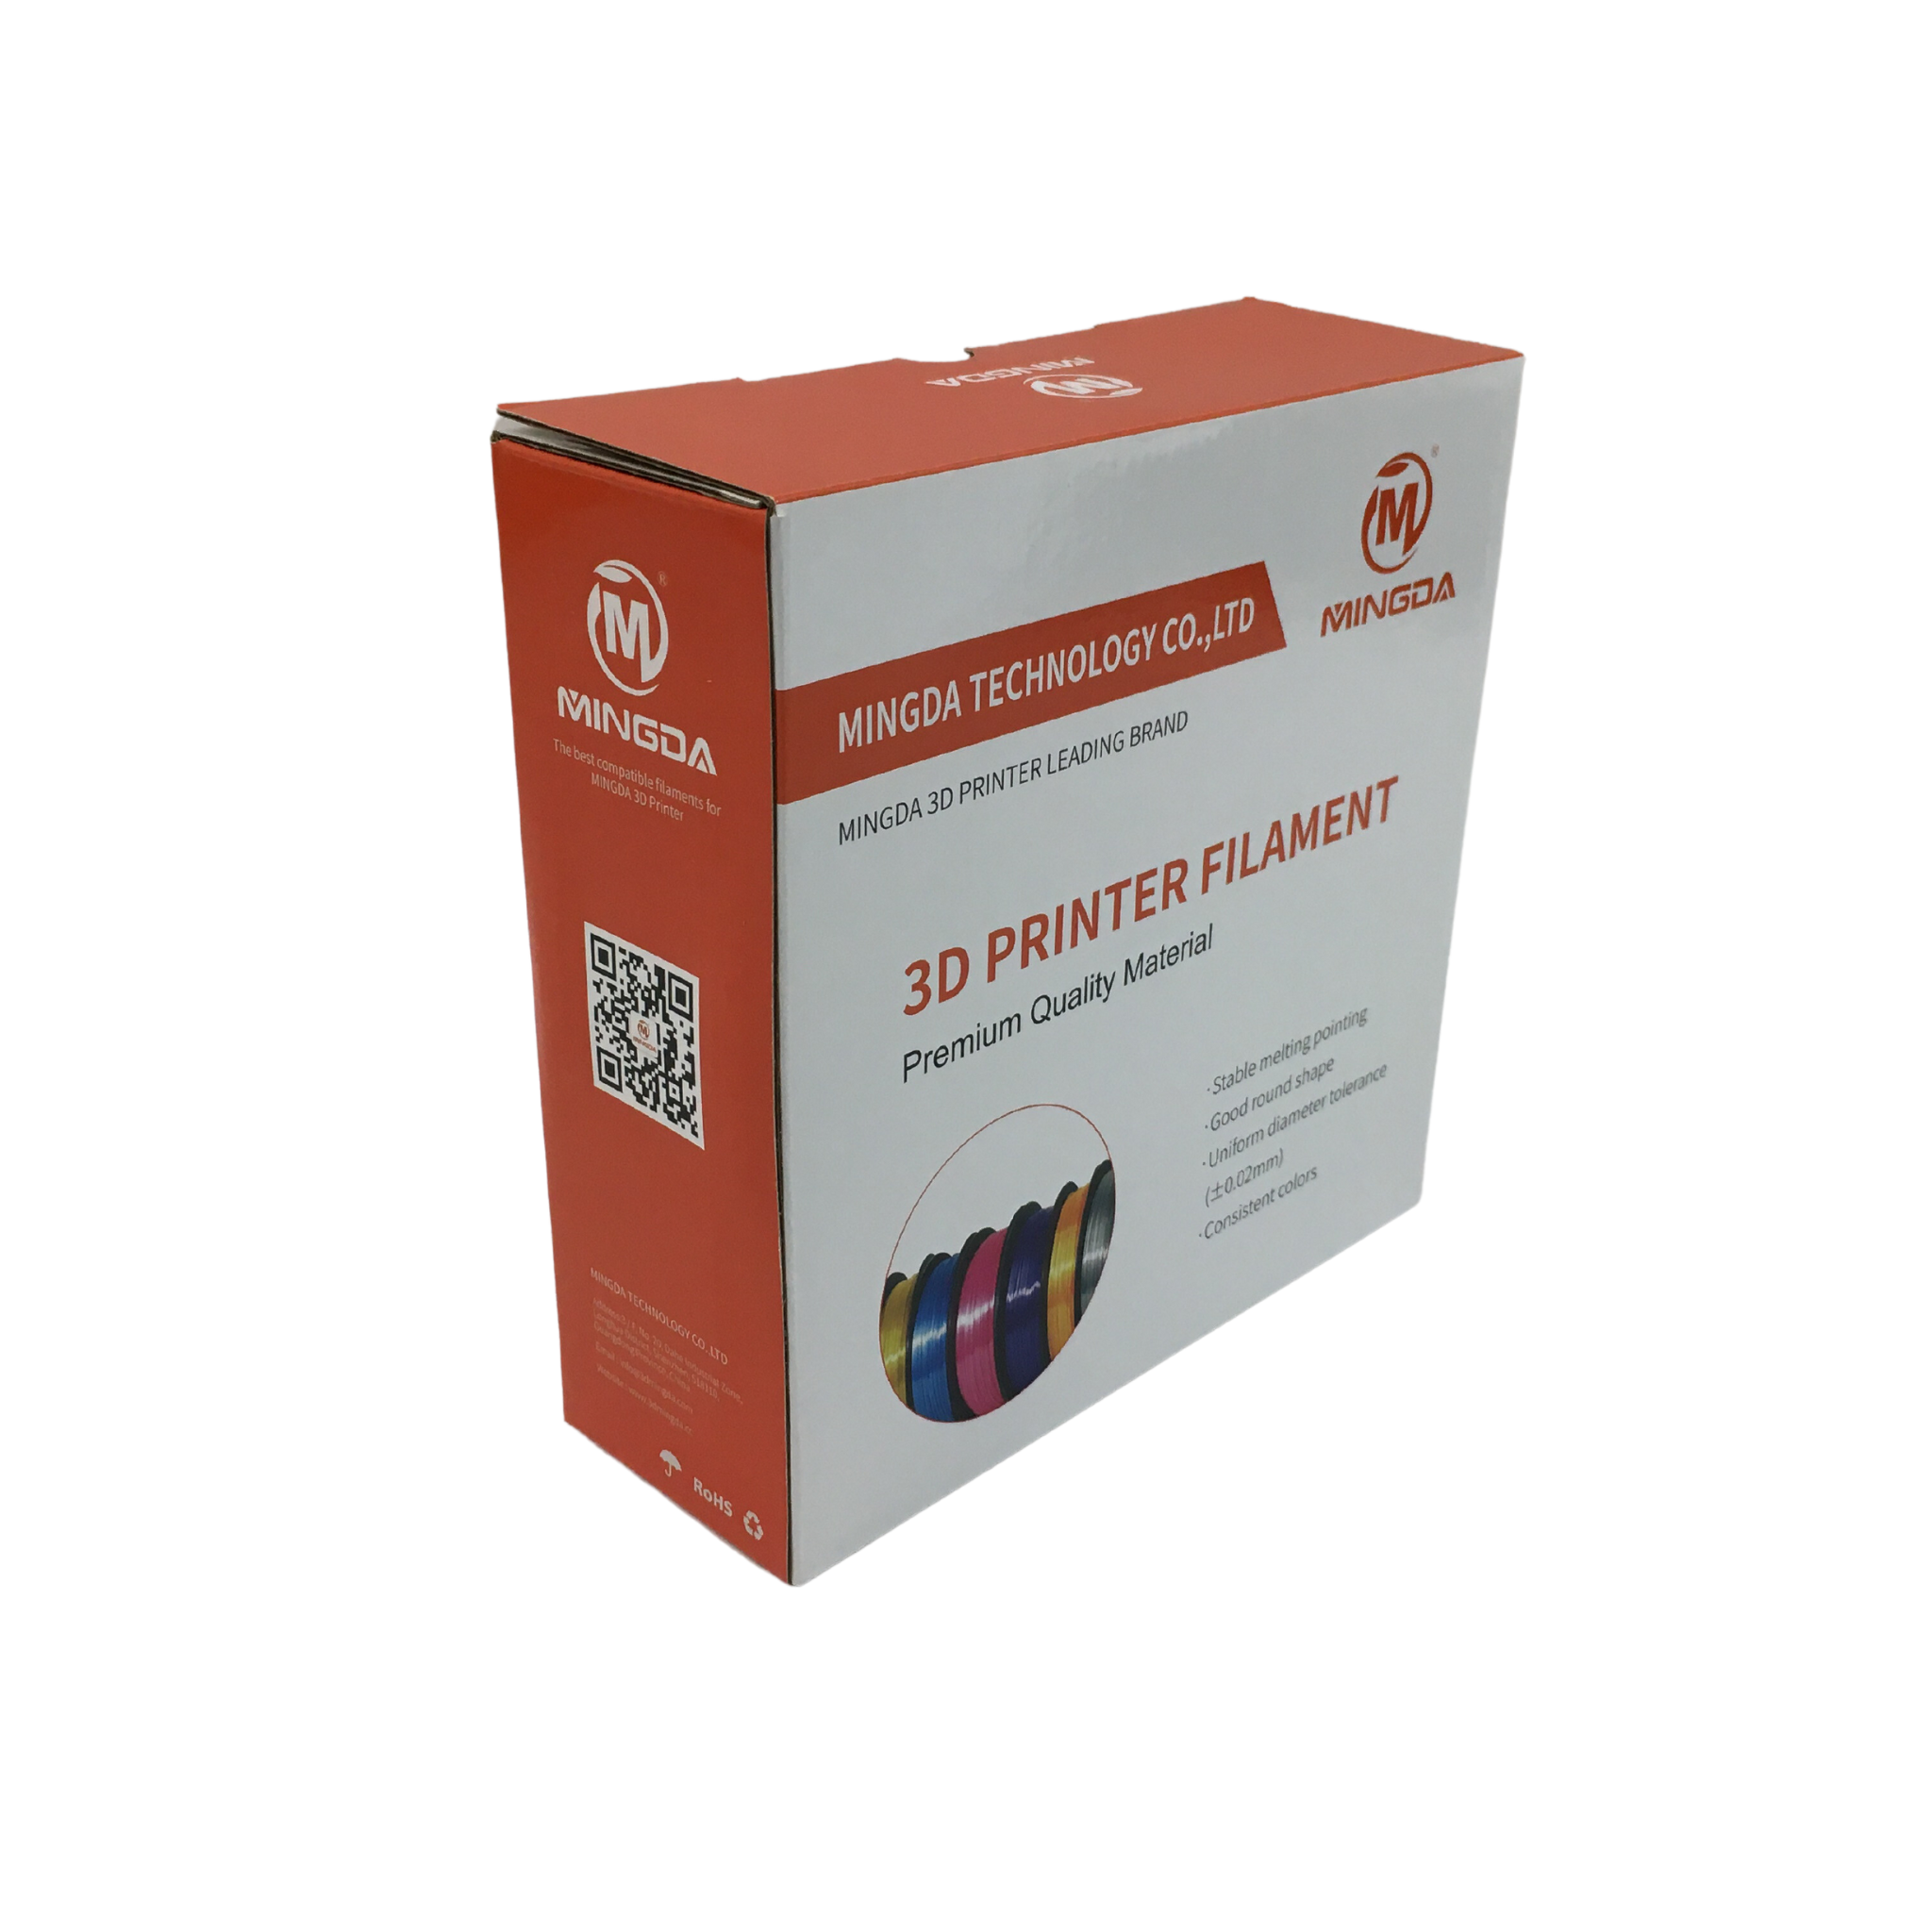 BD Print  Best Deals - Print and Packaging